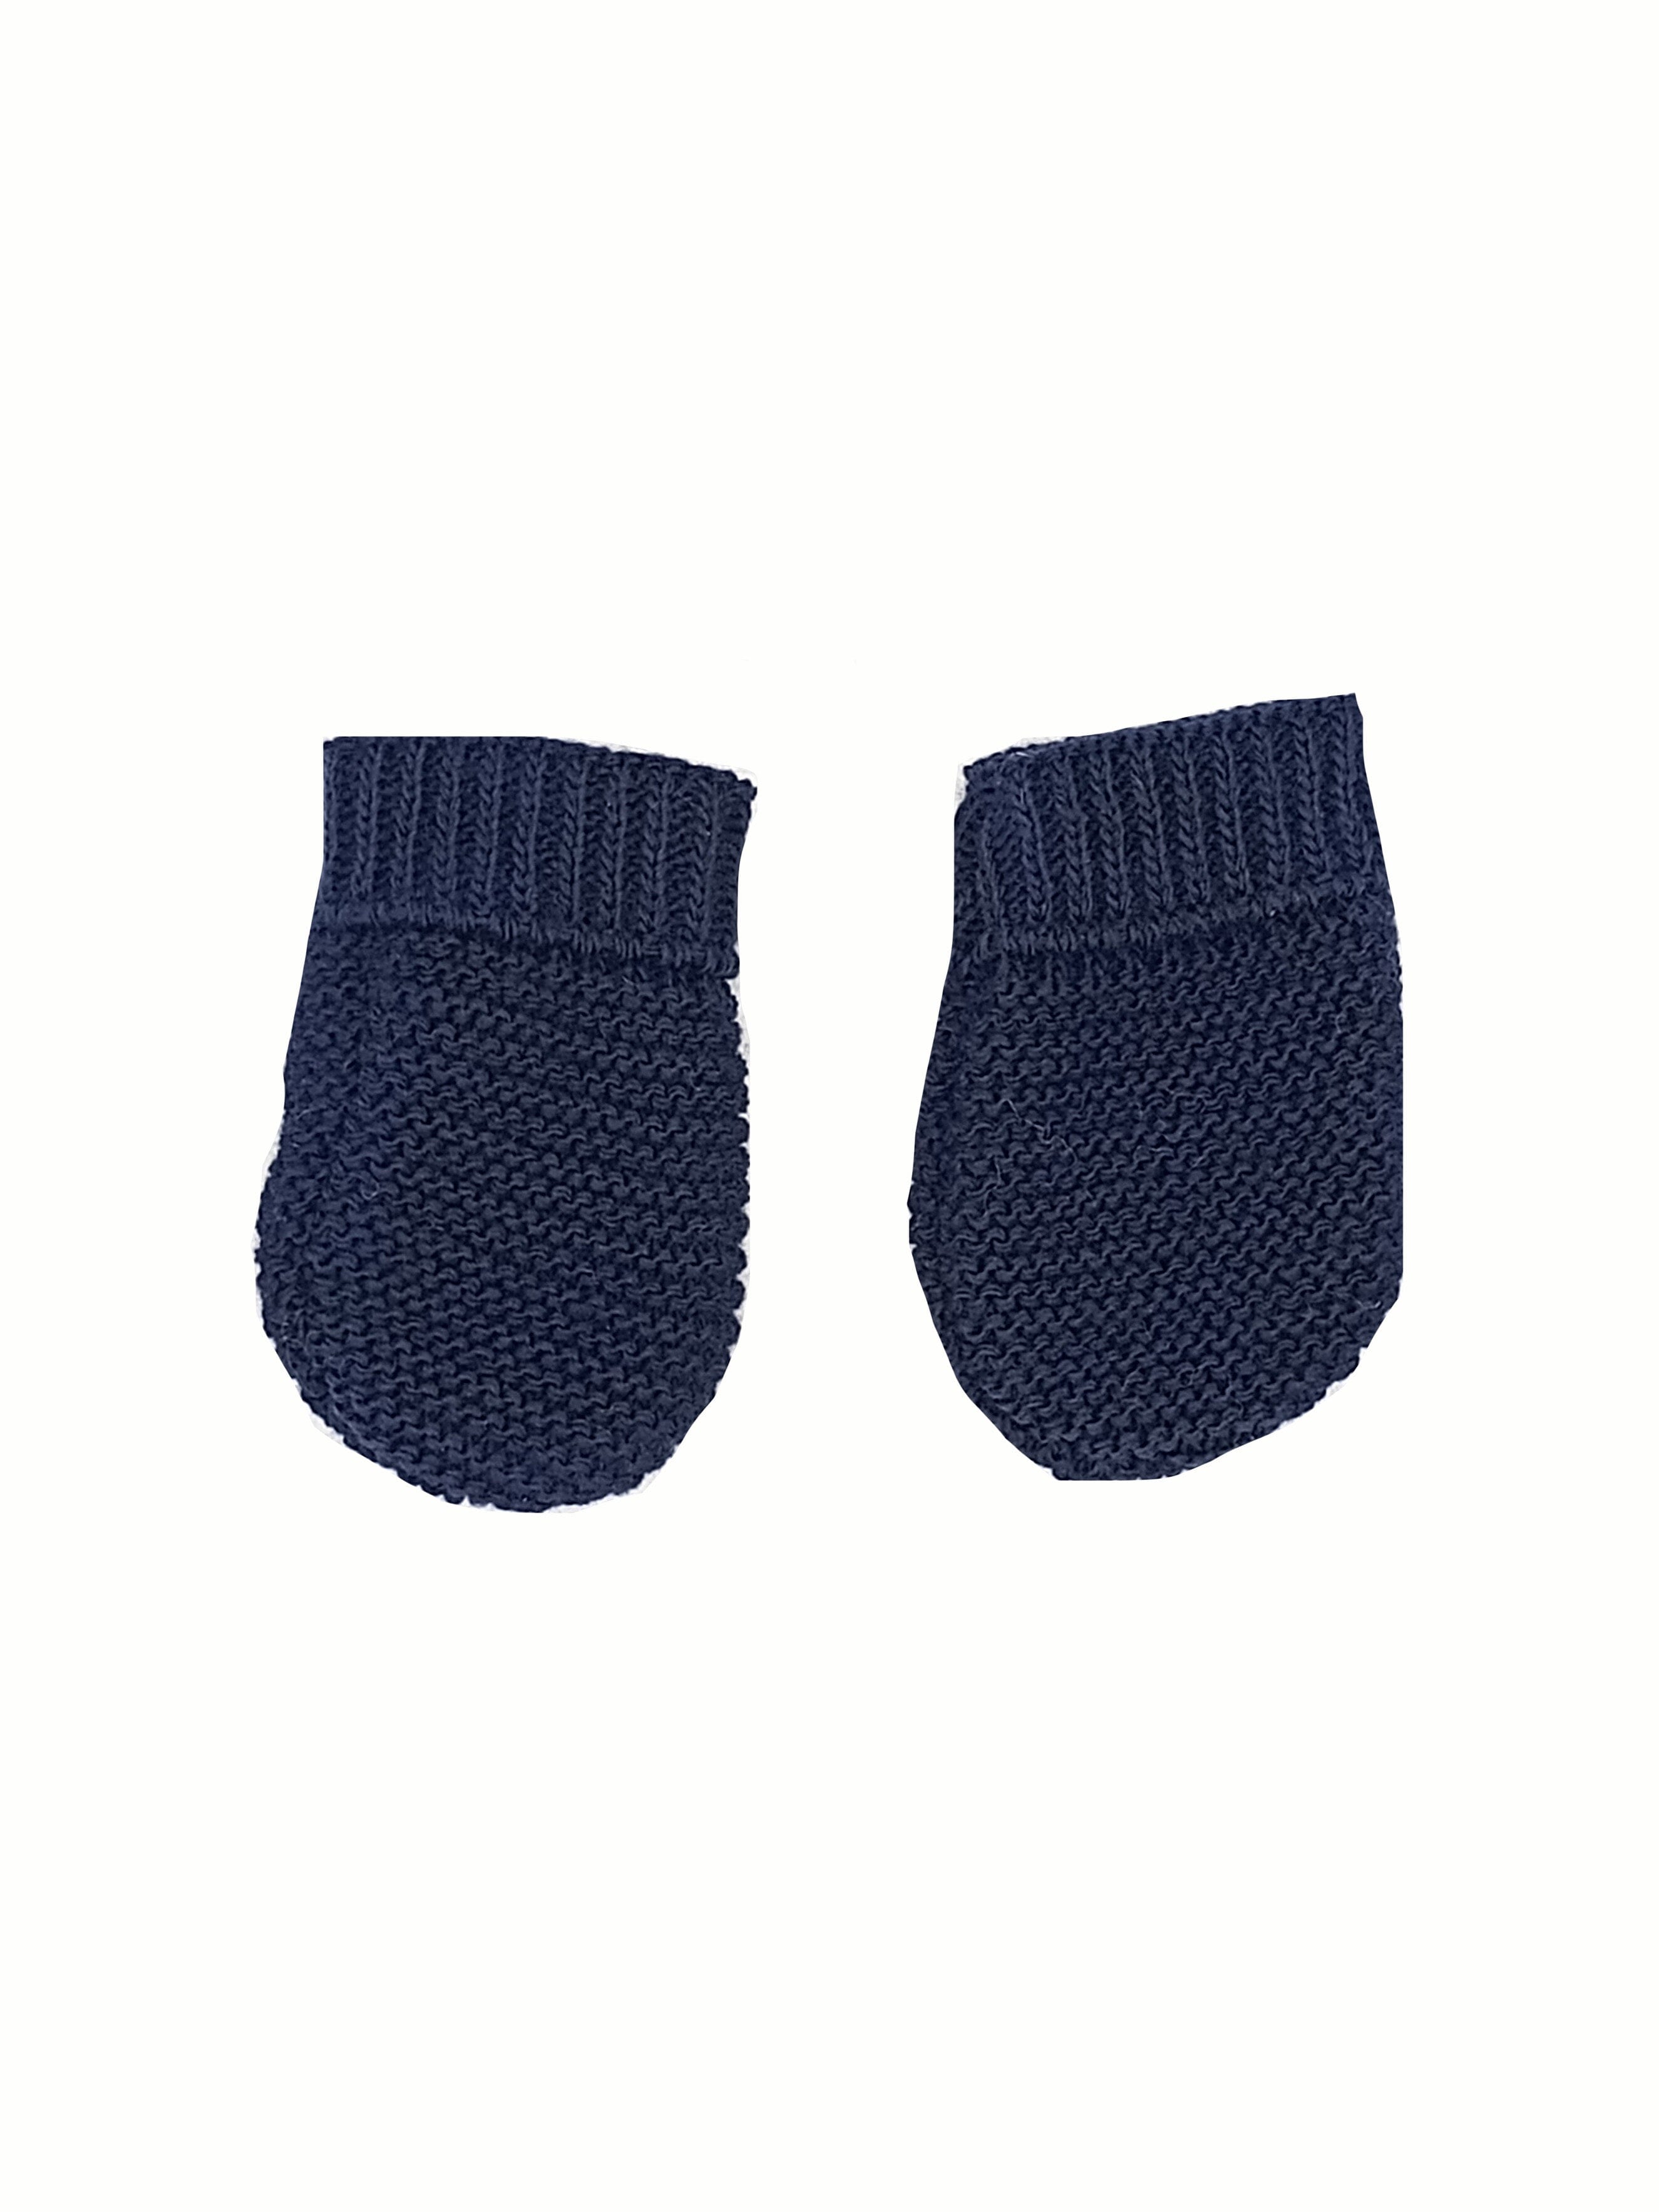 Tiny Baby Navy Knitted Gloves/Mittens - Mittens - La Manufacture de Layette